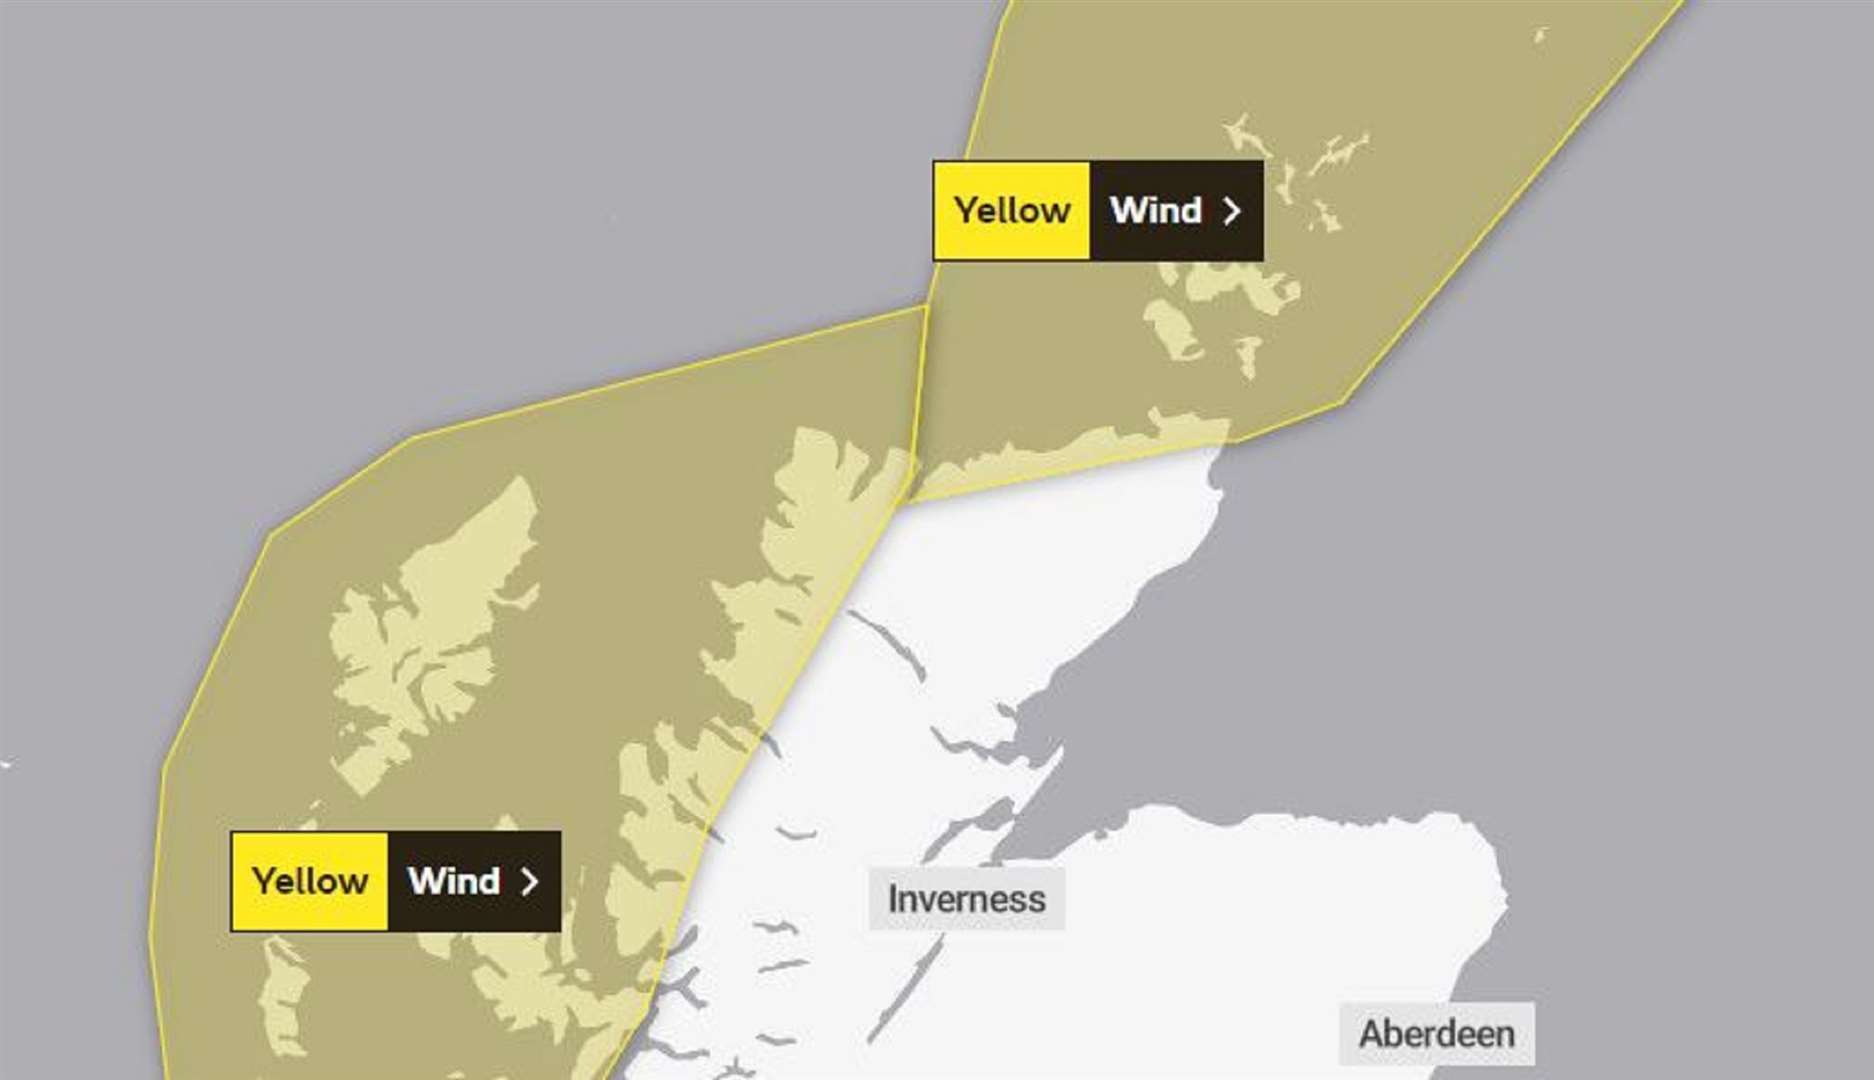 Met Office Yellow Warning for Monday with high winds forecast around the north Caithness coastline.